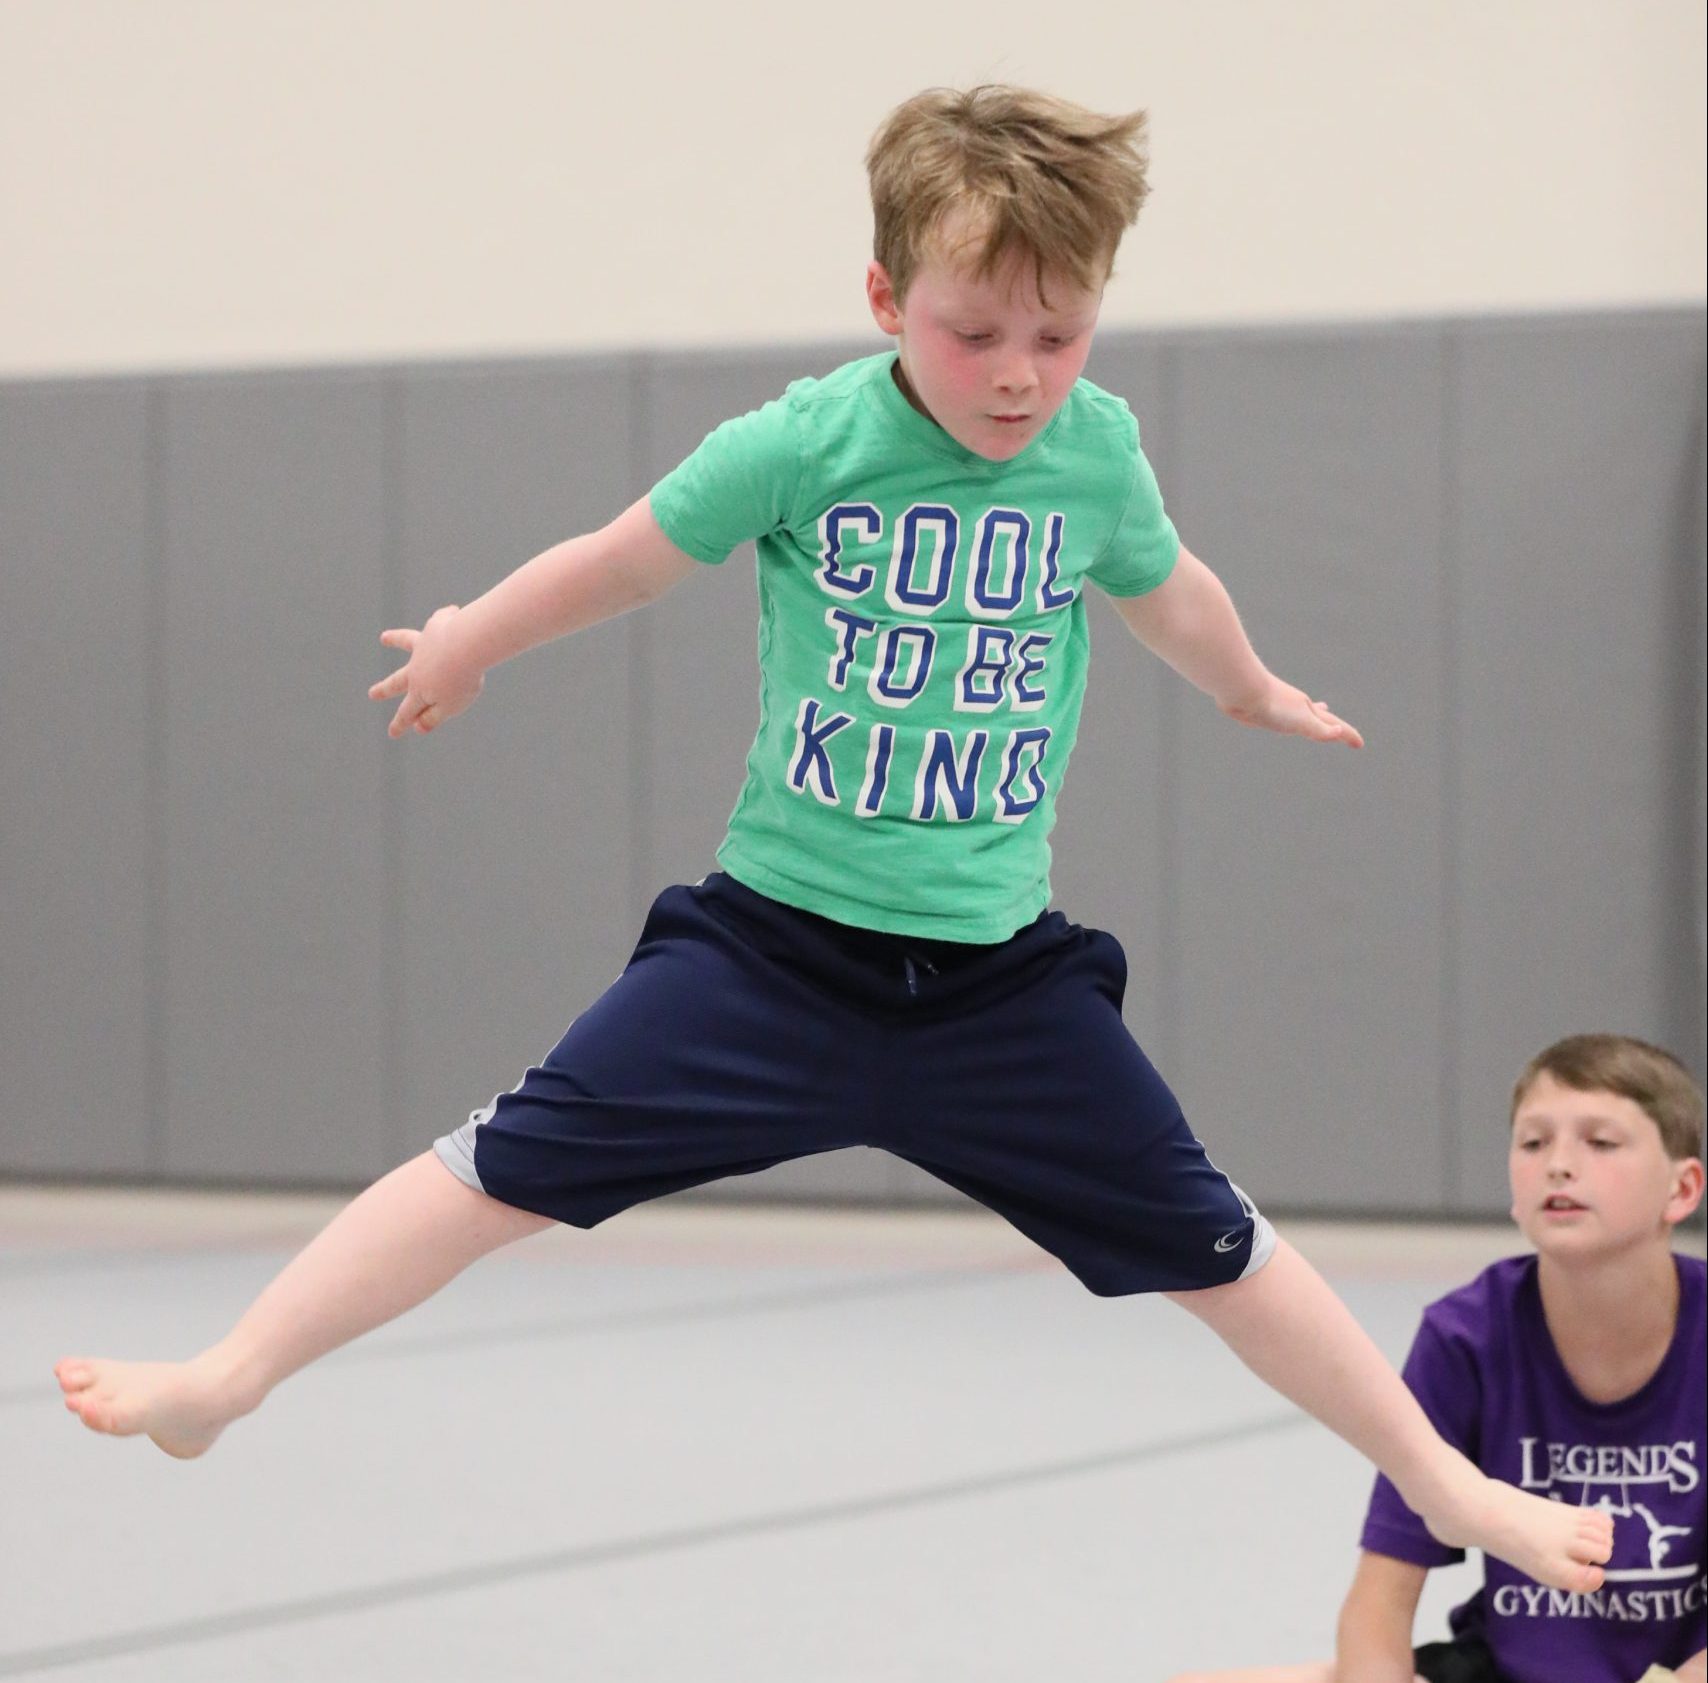 Kid doing a jumping split at Legends Gymnastics in North Andover, MA.